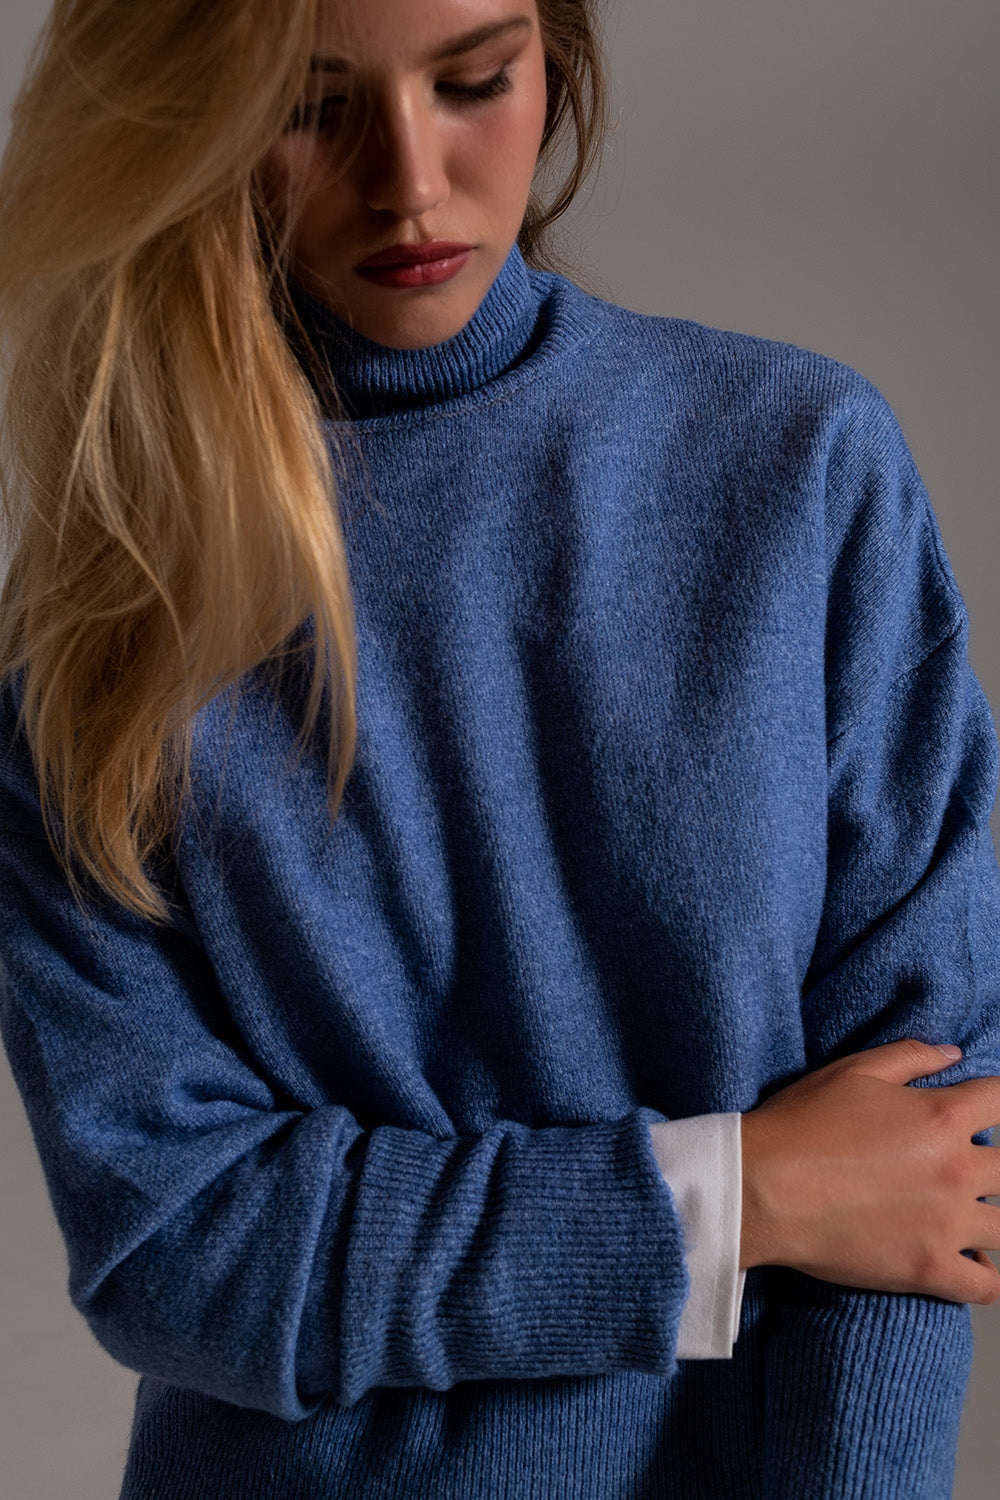 Blue turtleneck sweater in a soft knitted fabric - Szua Store